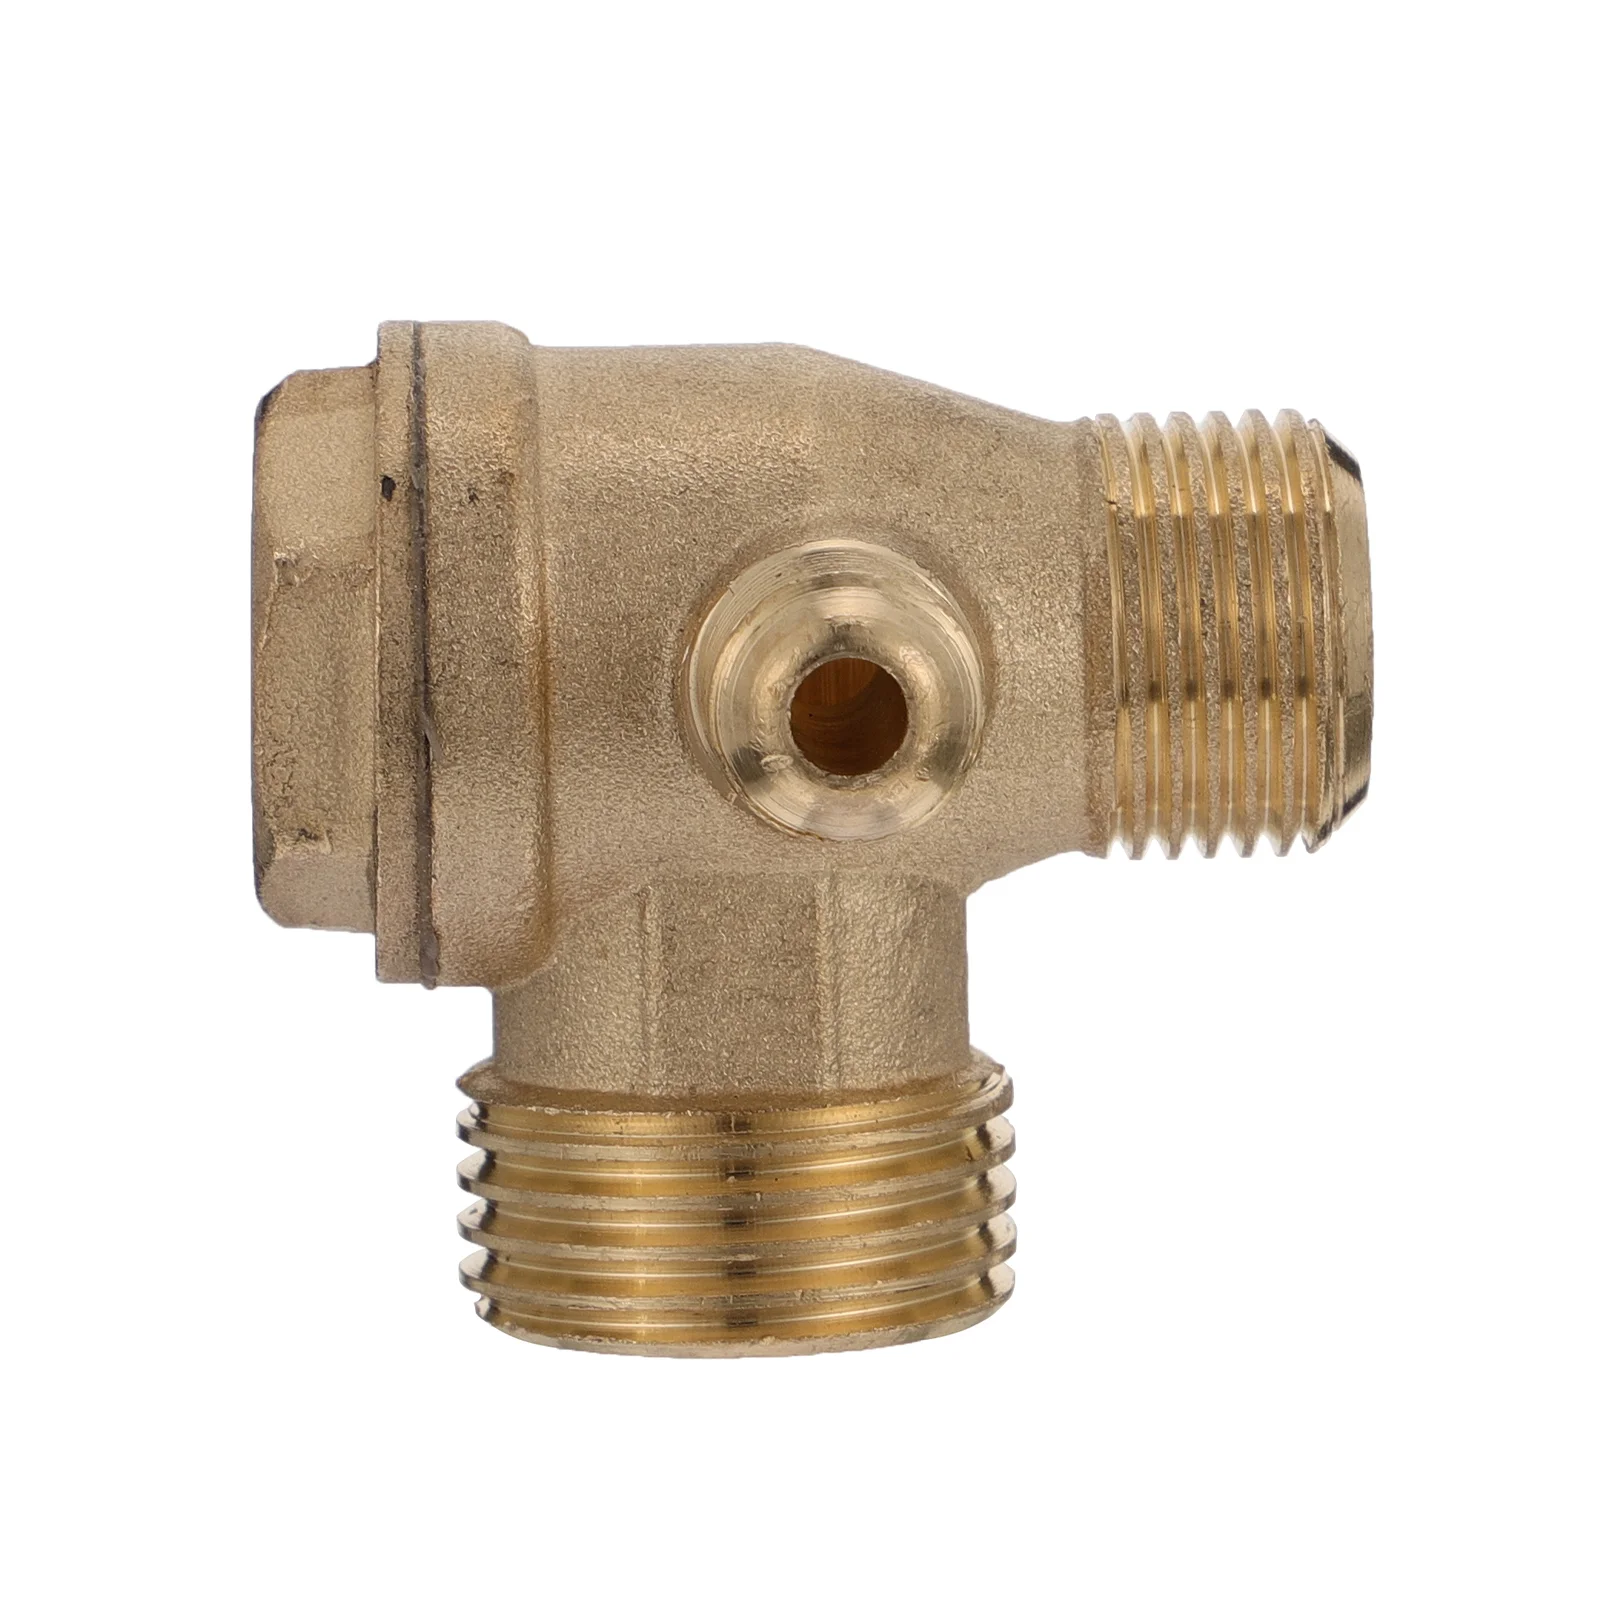 

Air Compressorcheck Valved Non Return Threaded Parts Connector Tube Male Tool Inline One Way Pressure Adapter Central Tank Gas